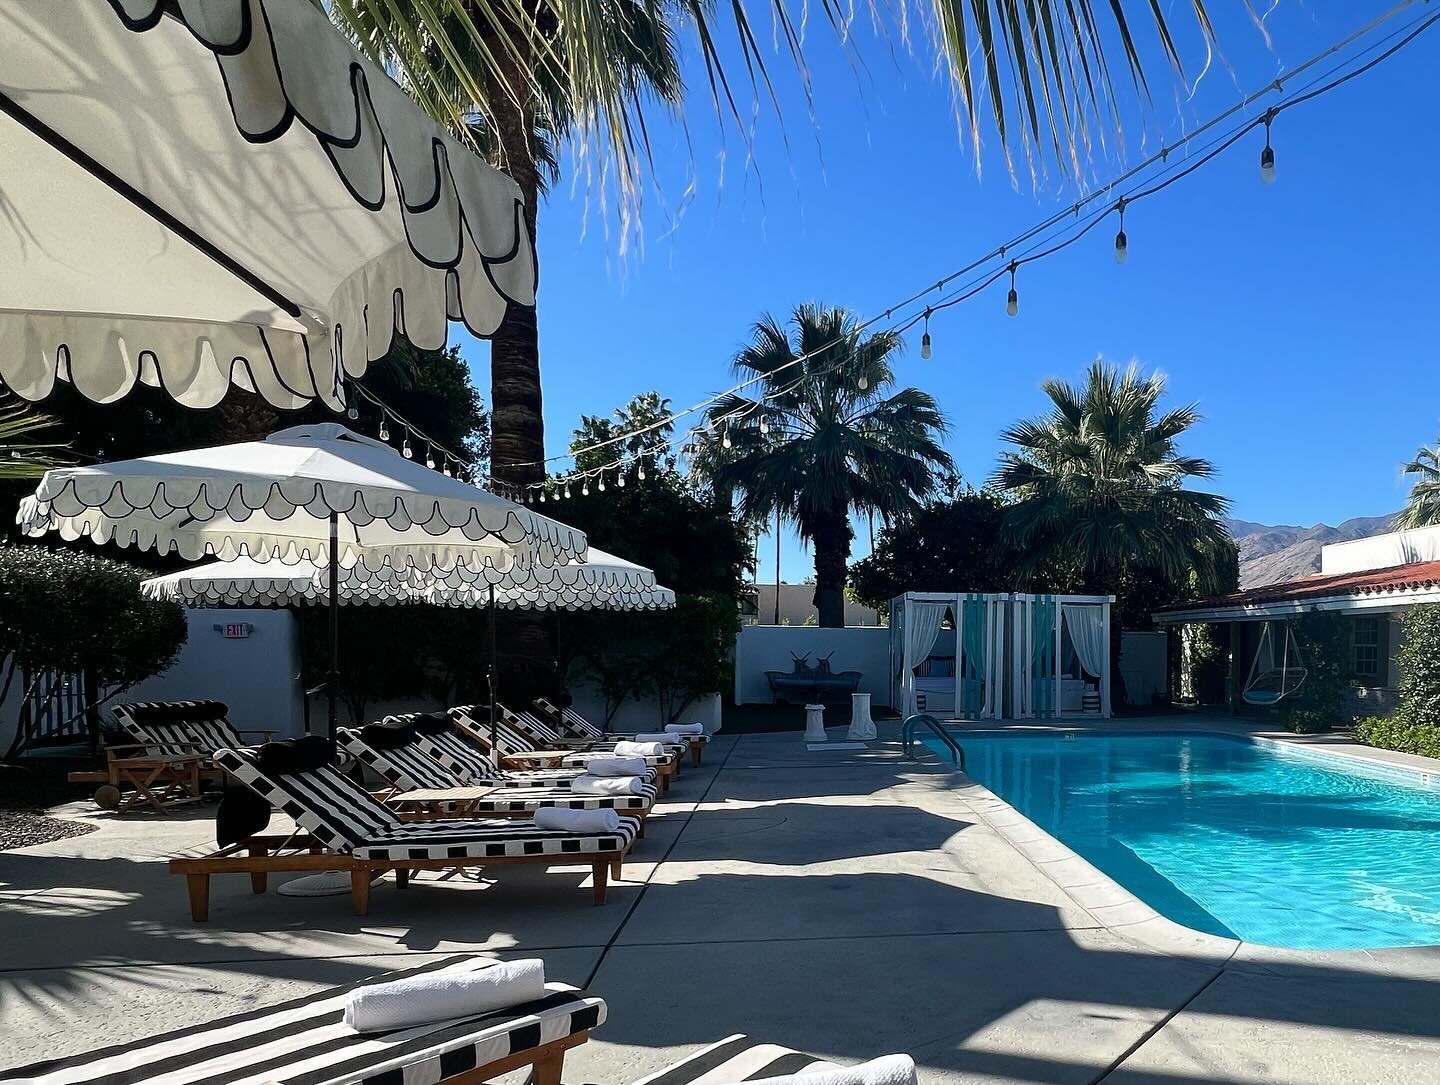 I&rsquo;m pretty sure that when my soul came into this world she requested the Palm Springs package. Thank you @altsummit and @saguarohotels  for putting on such an inviting, happy and inspiring event. Literally an oasis in the desert of entrepreneur